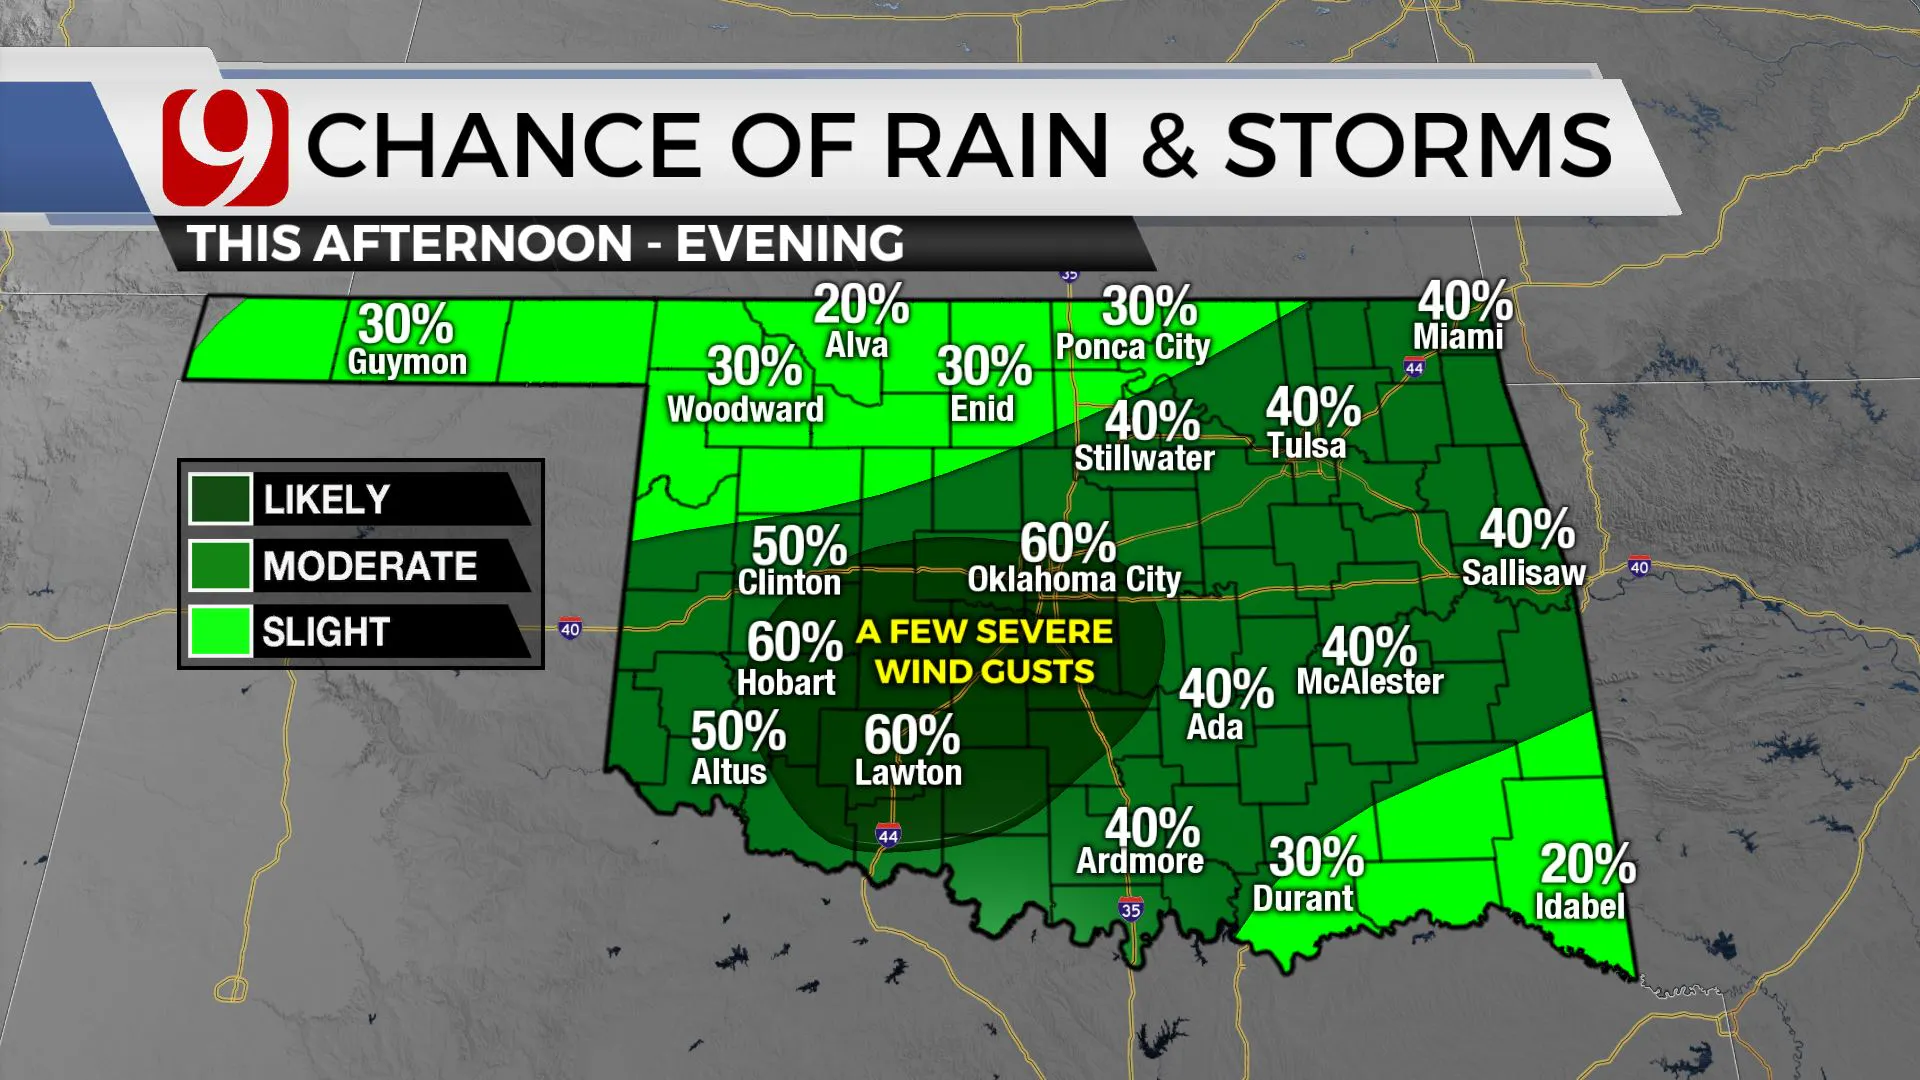 Chances of rain and storms across the state.